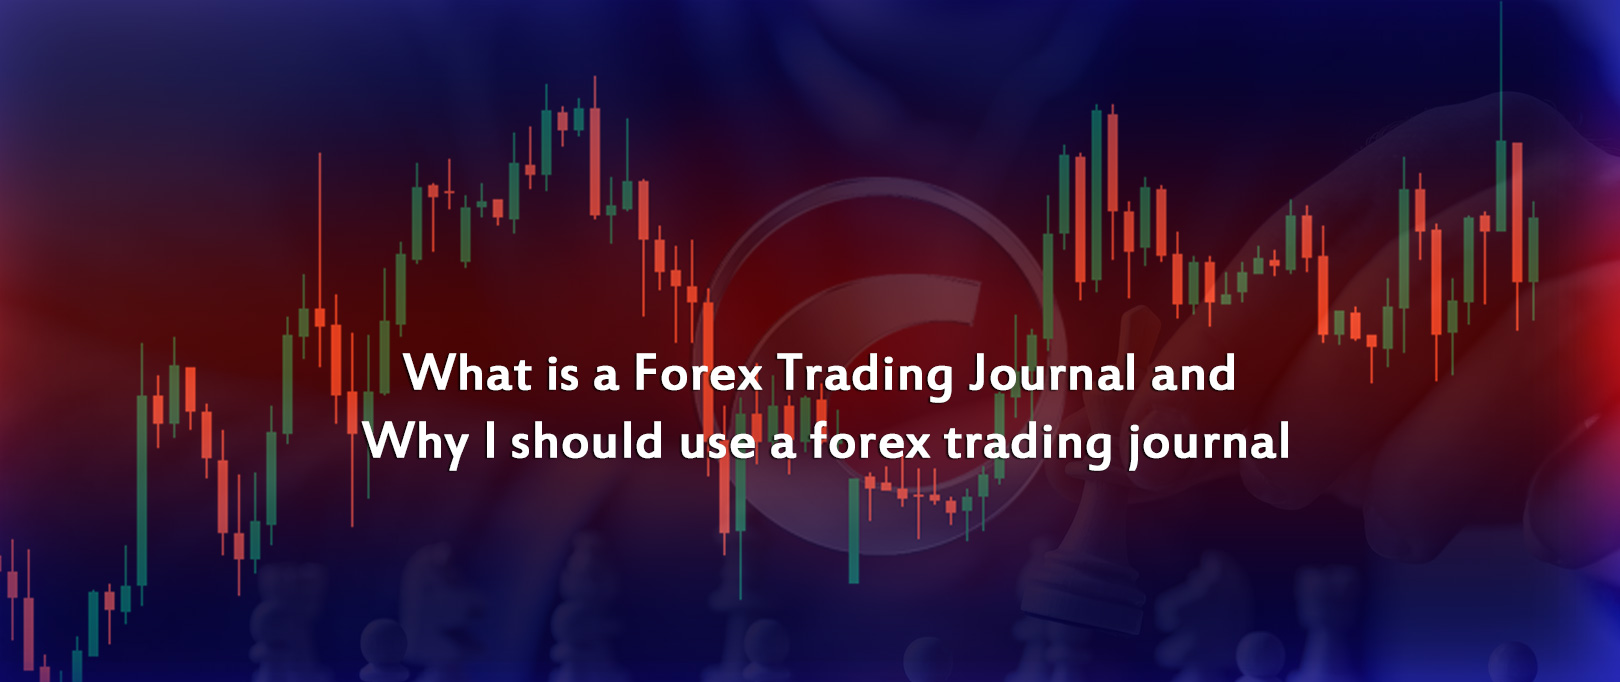 What forex broker should i use